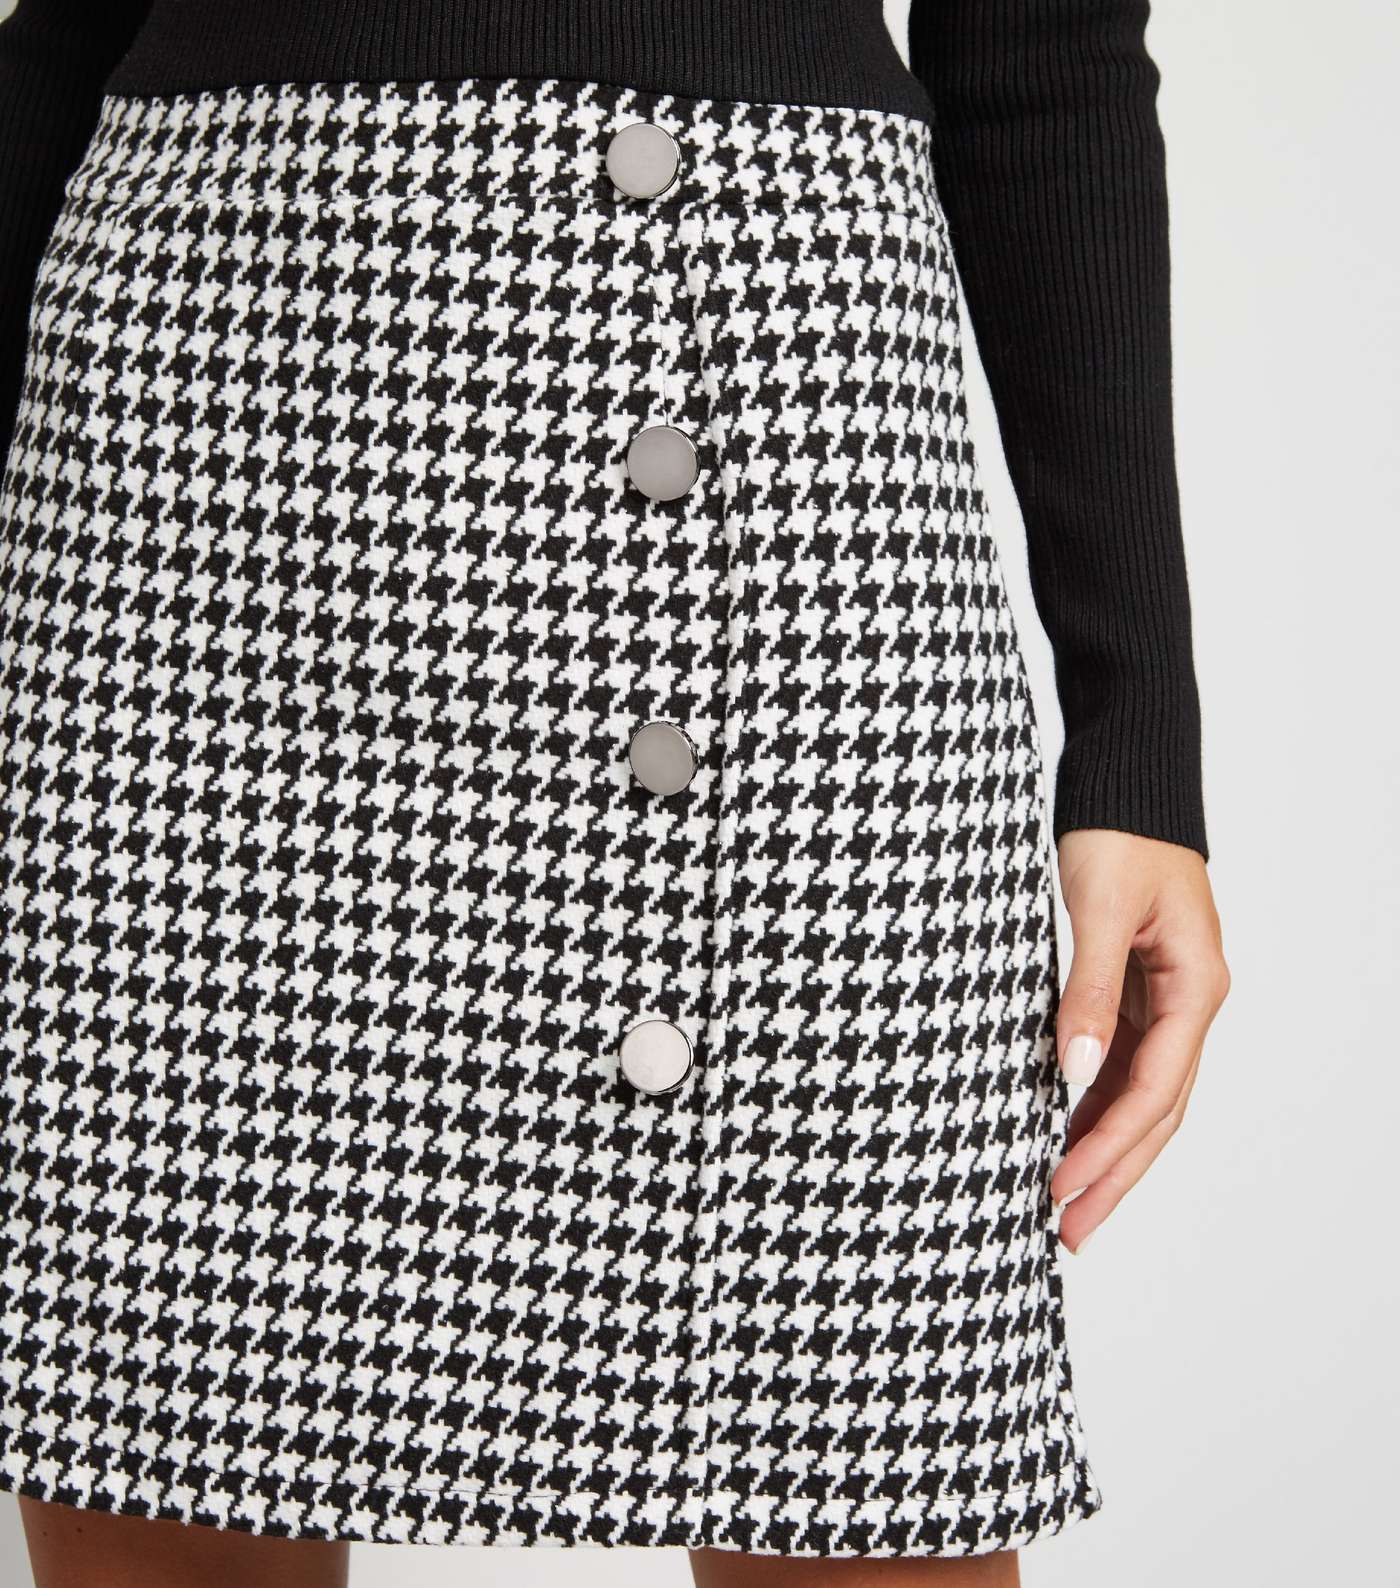 Black Dogtooth 2 in 1 Dress Image 5